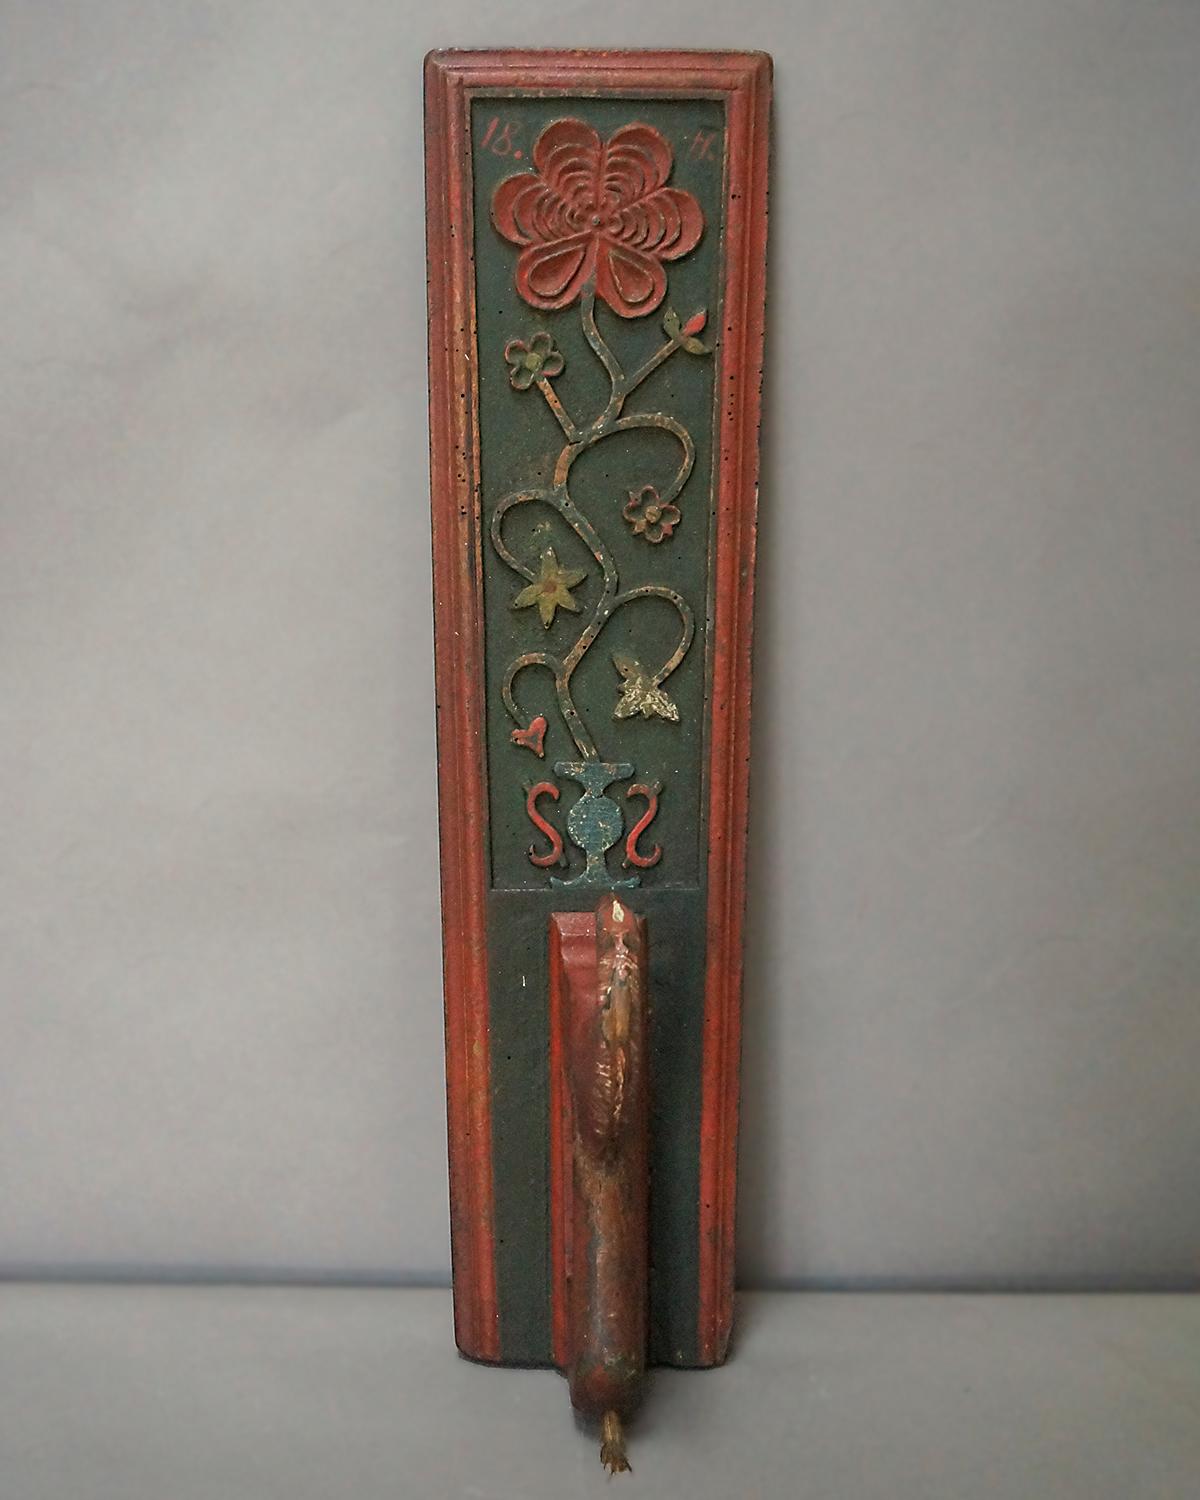 Danish mangle board dated 1841 with a horse handle. Beautifully carved flowering vine in an urn. Original painted surface with great patina.